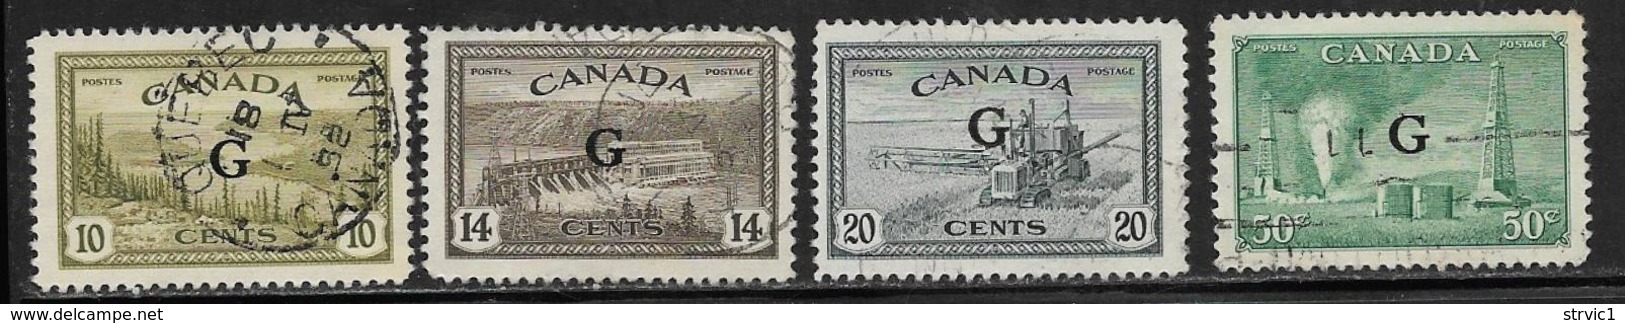 Canada Scott # O21-4 Used 1946 And 1950 Stamps Overprinted G, 1950 - Overprinted